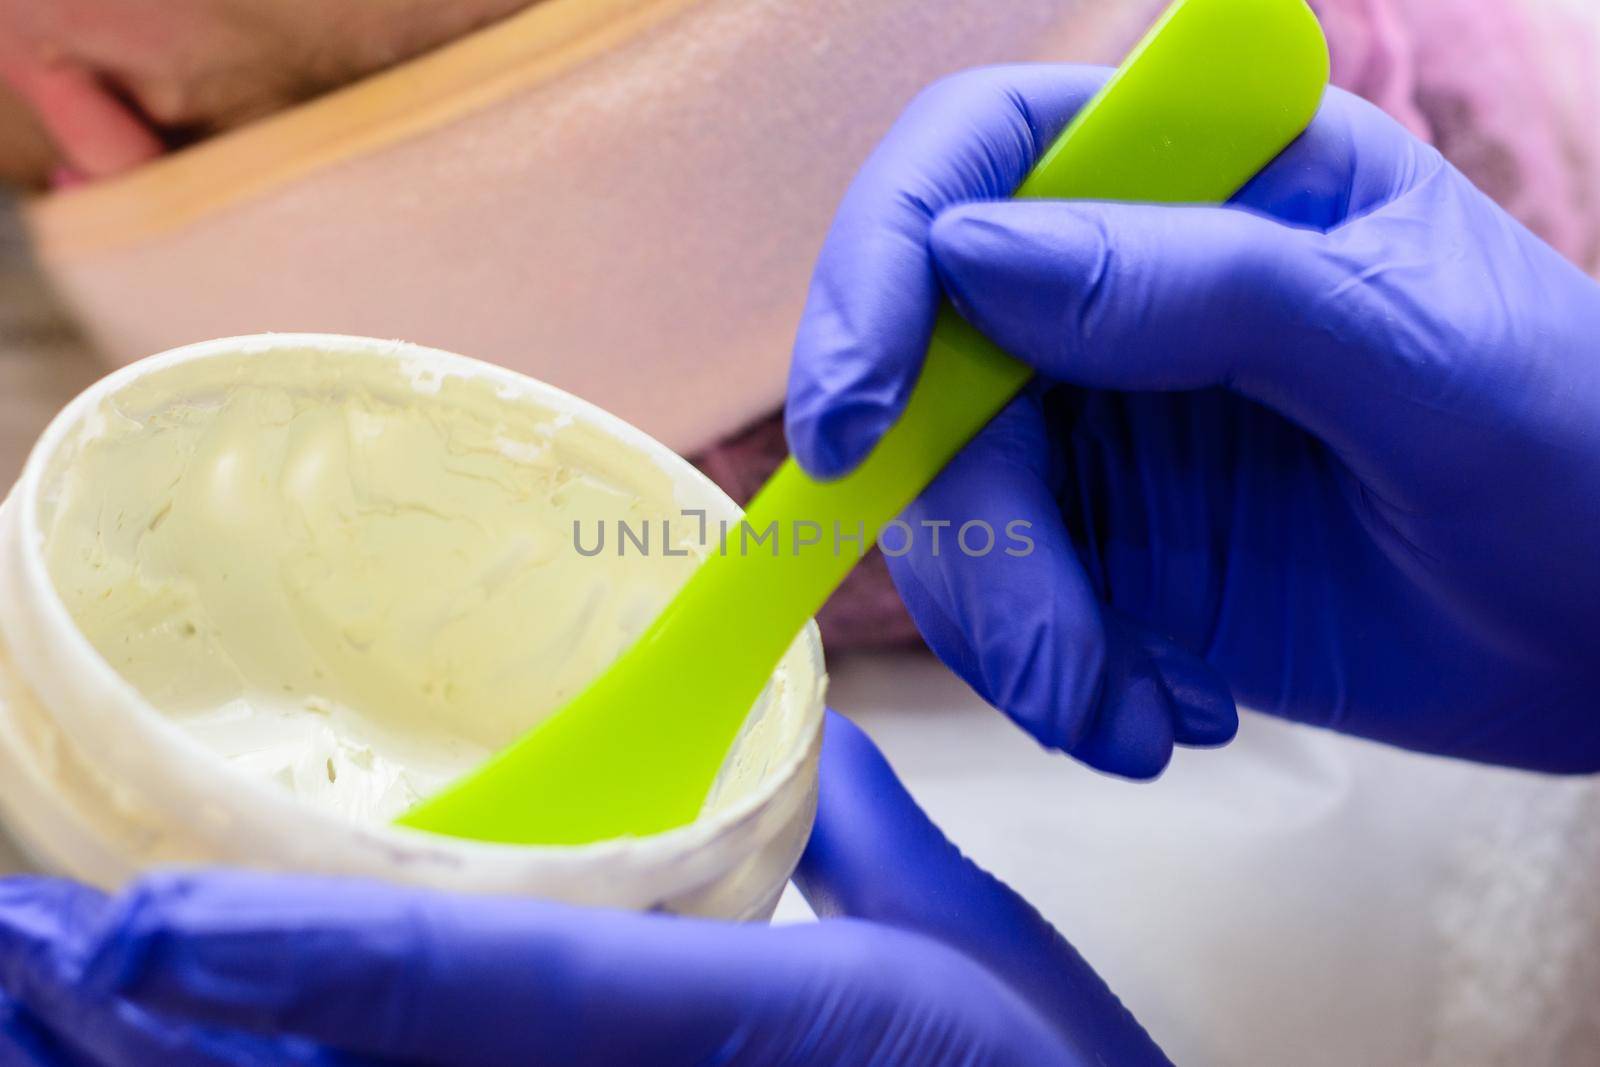 The beautician mixes the golden mask before applying on the face, mixing the mask in a bowl. new